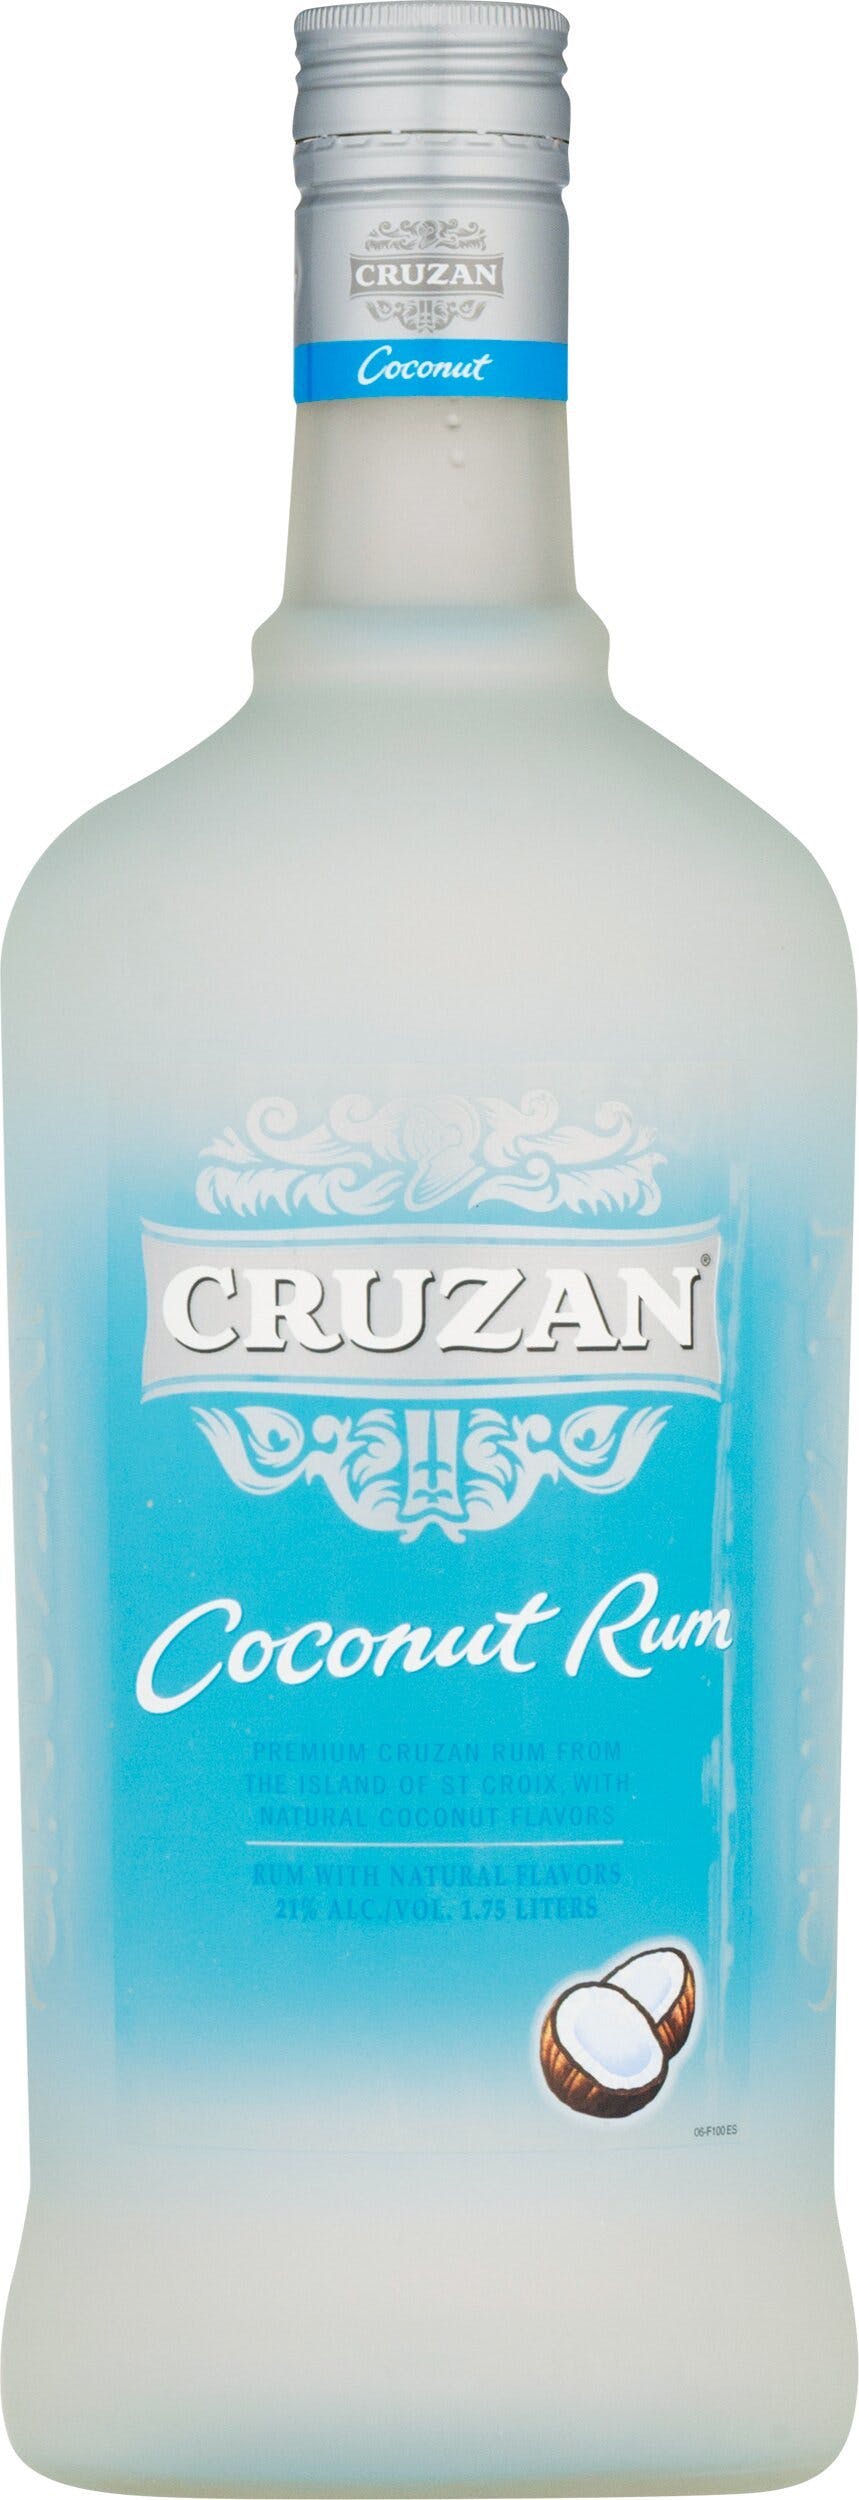 Caribbean Rum with a Spirit of St. Croix